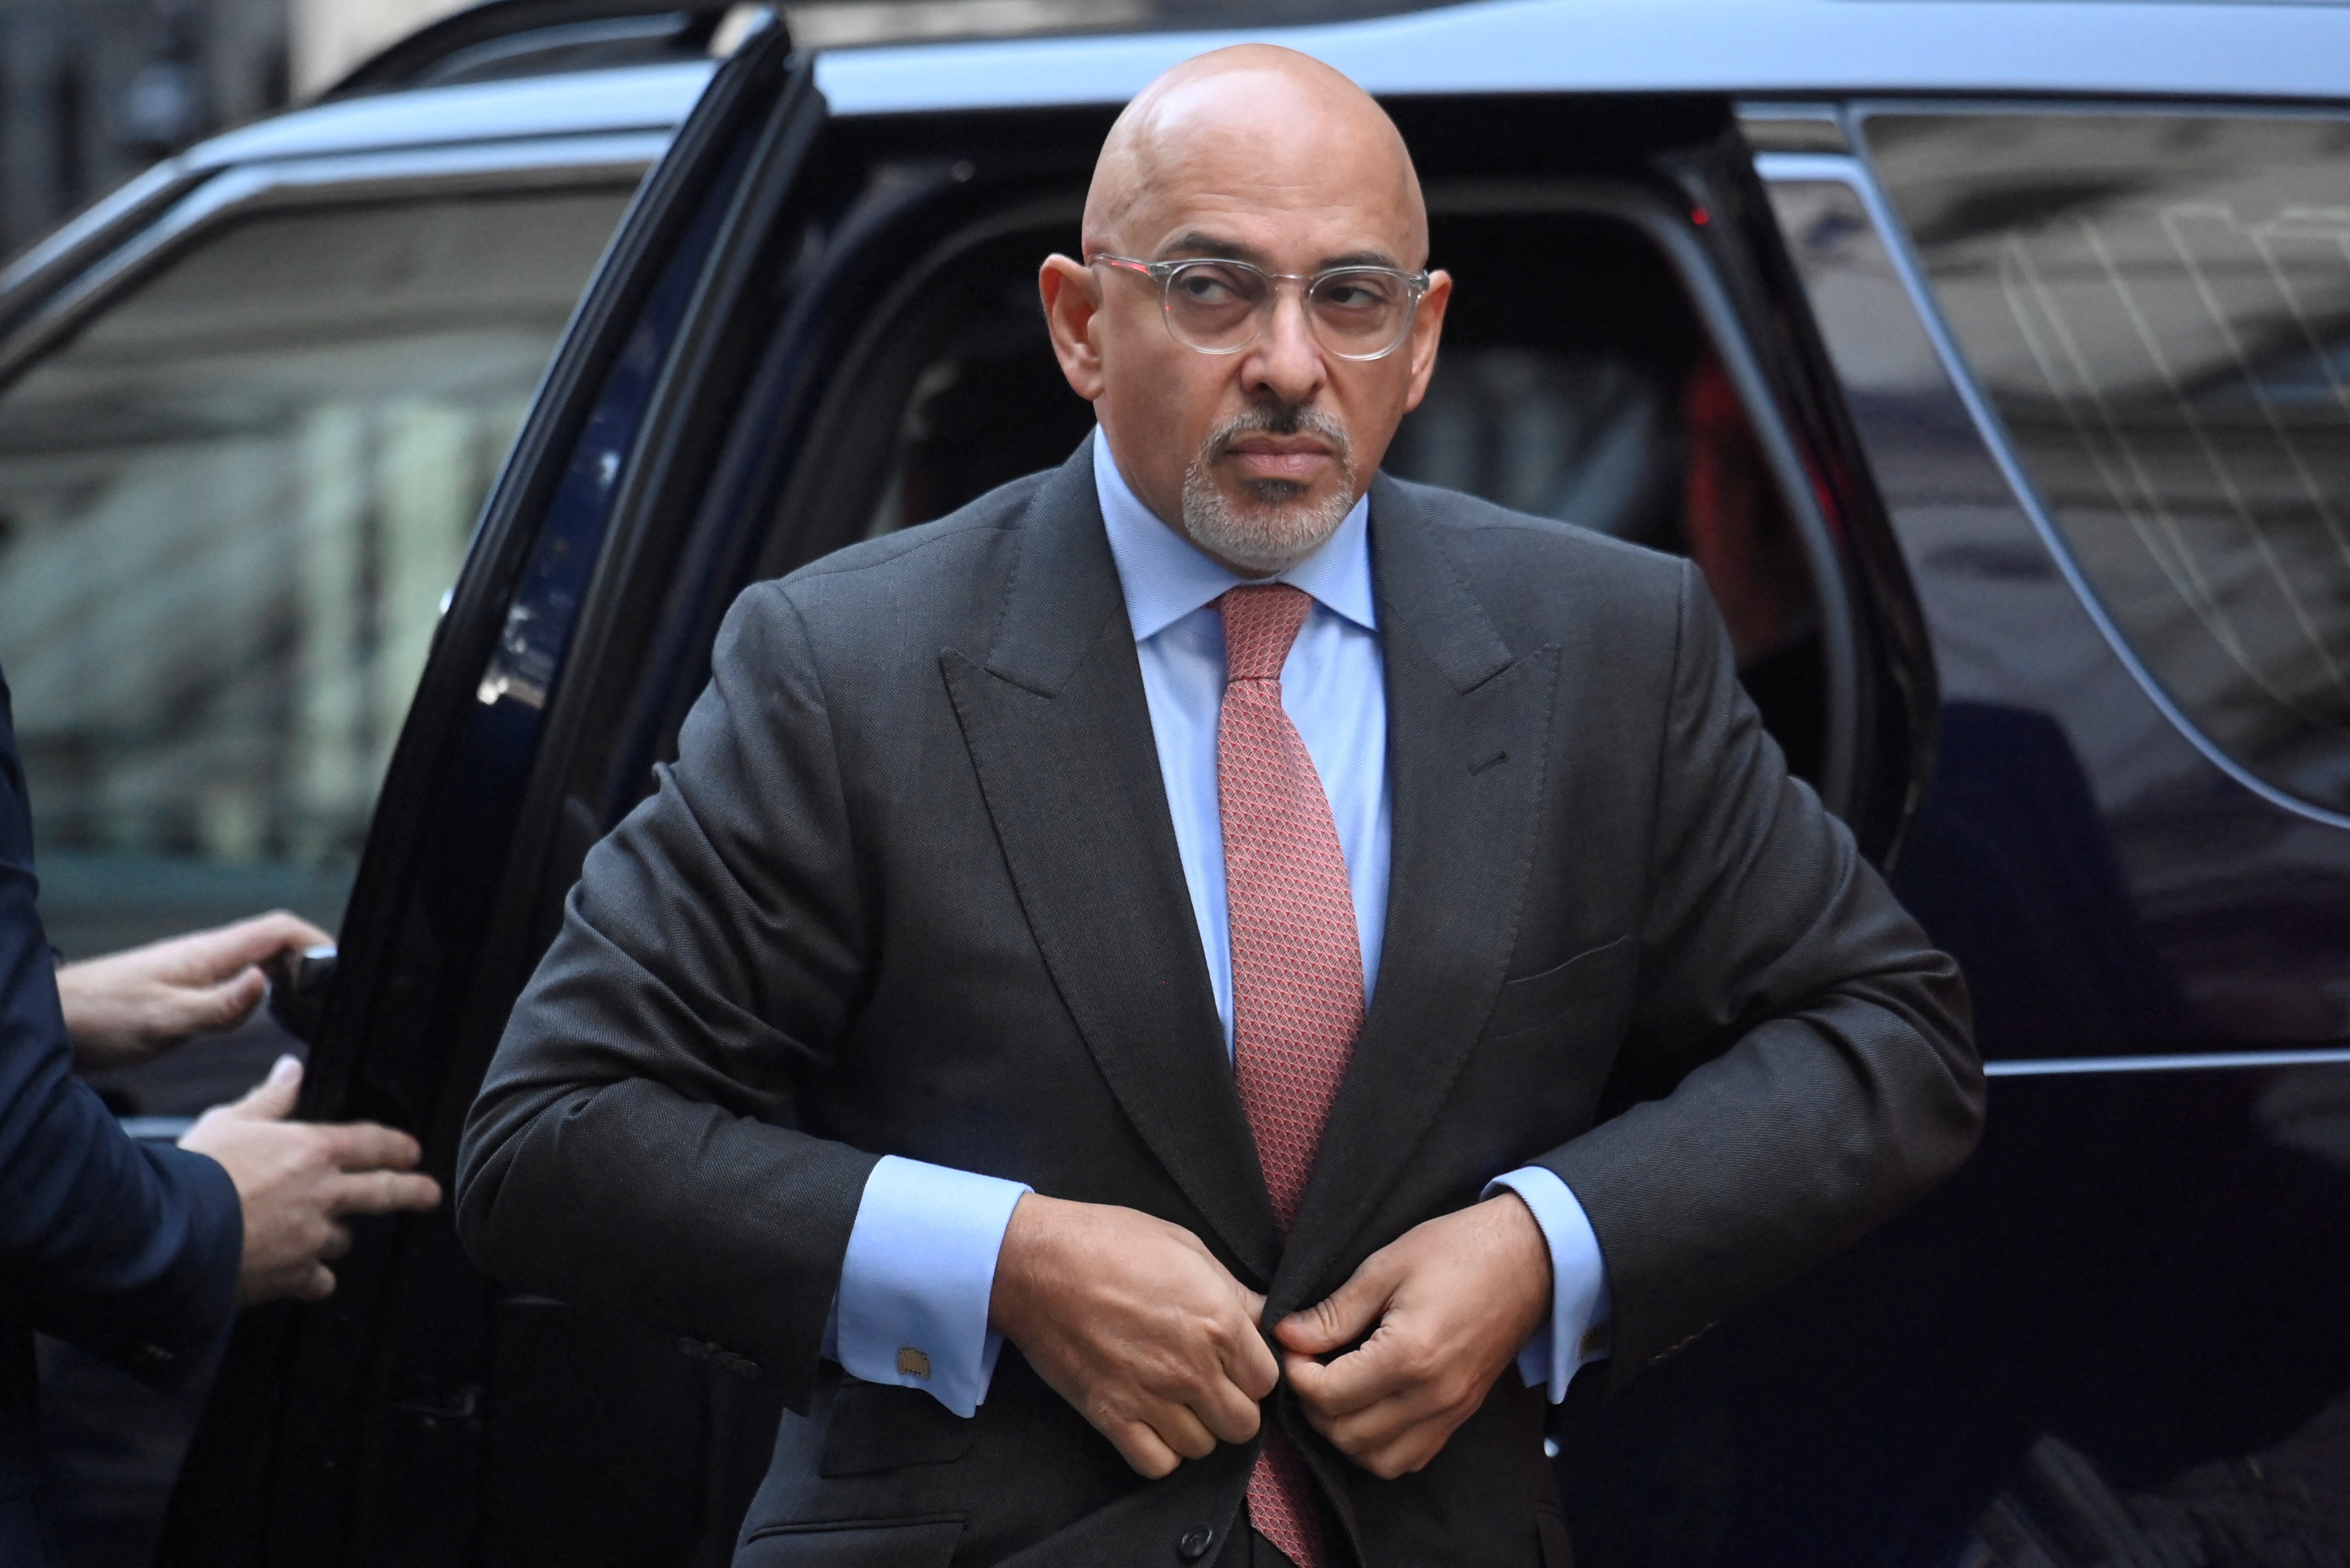 Mr Zahawi used tax payers’ money to heat his stables